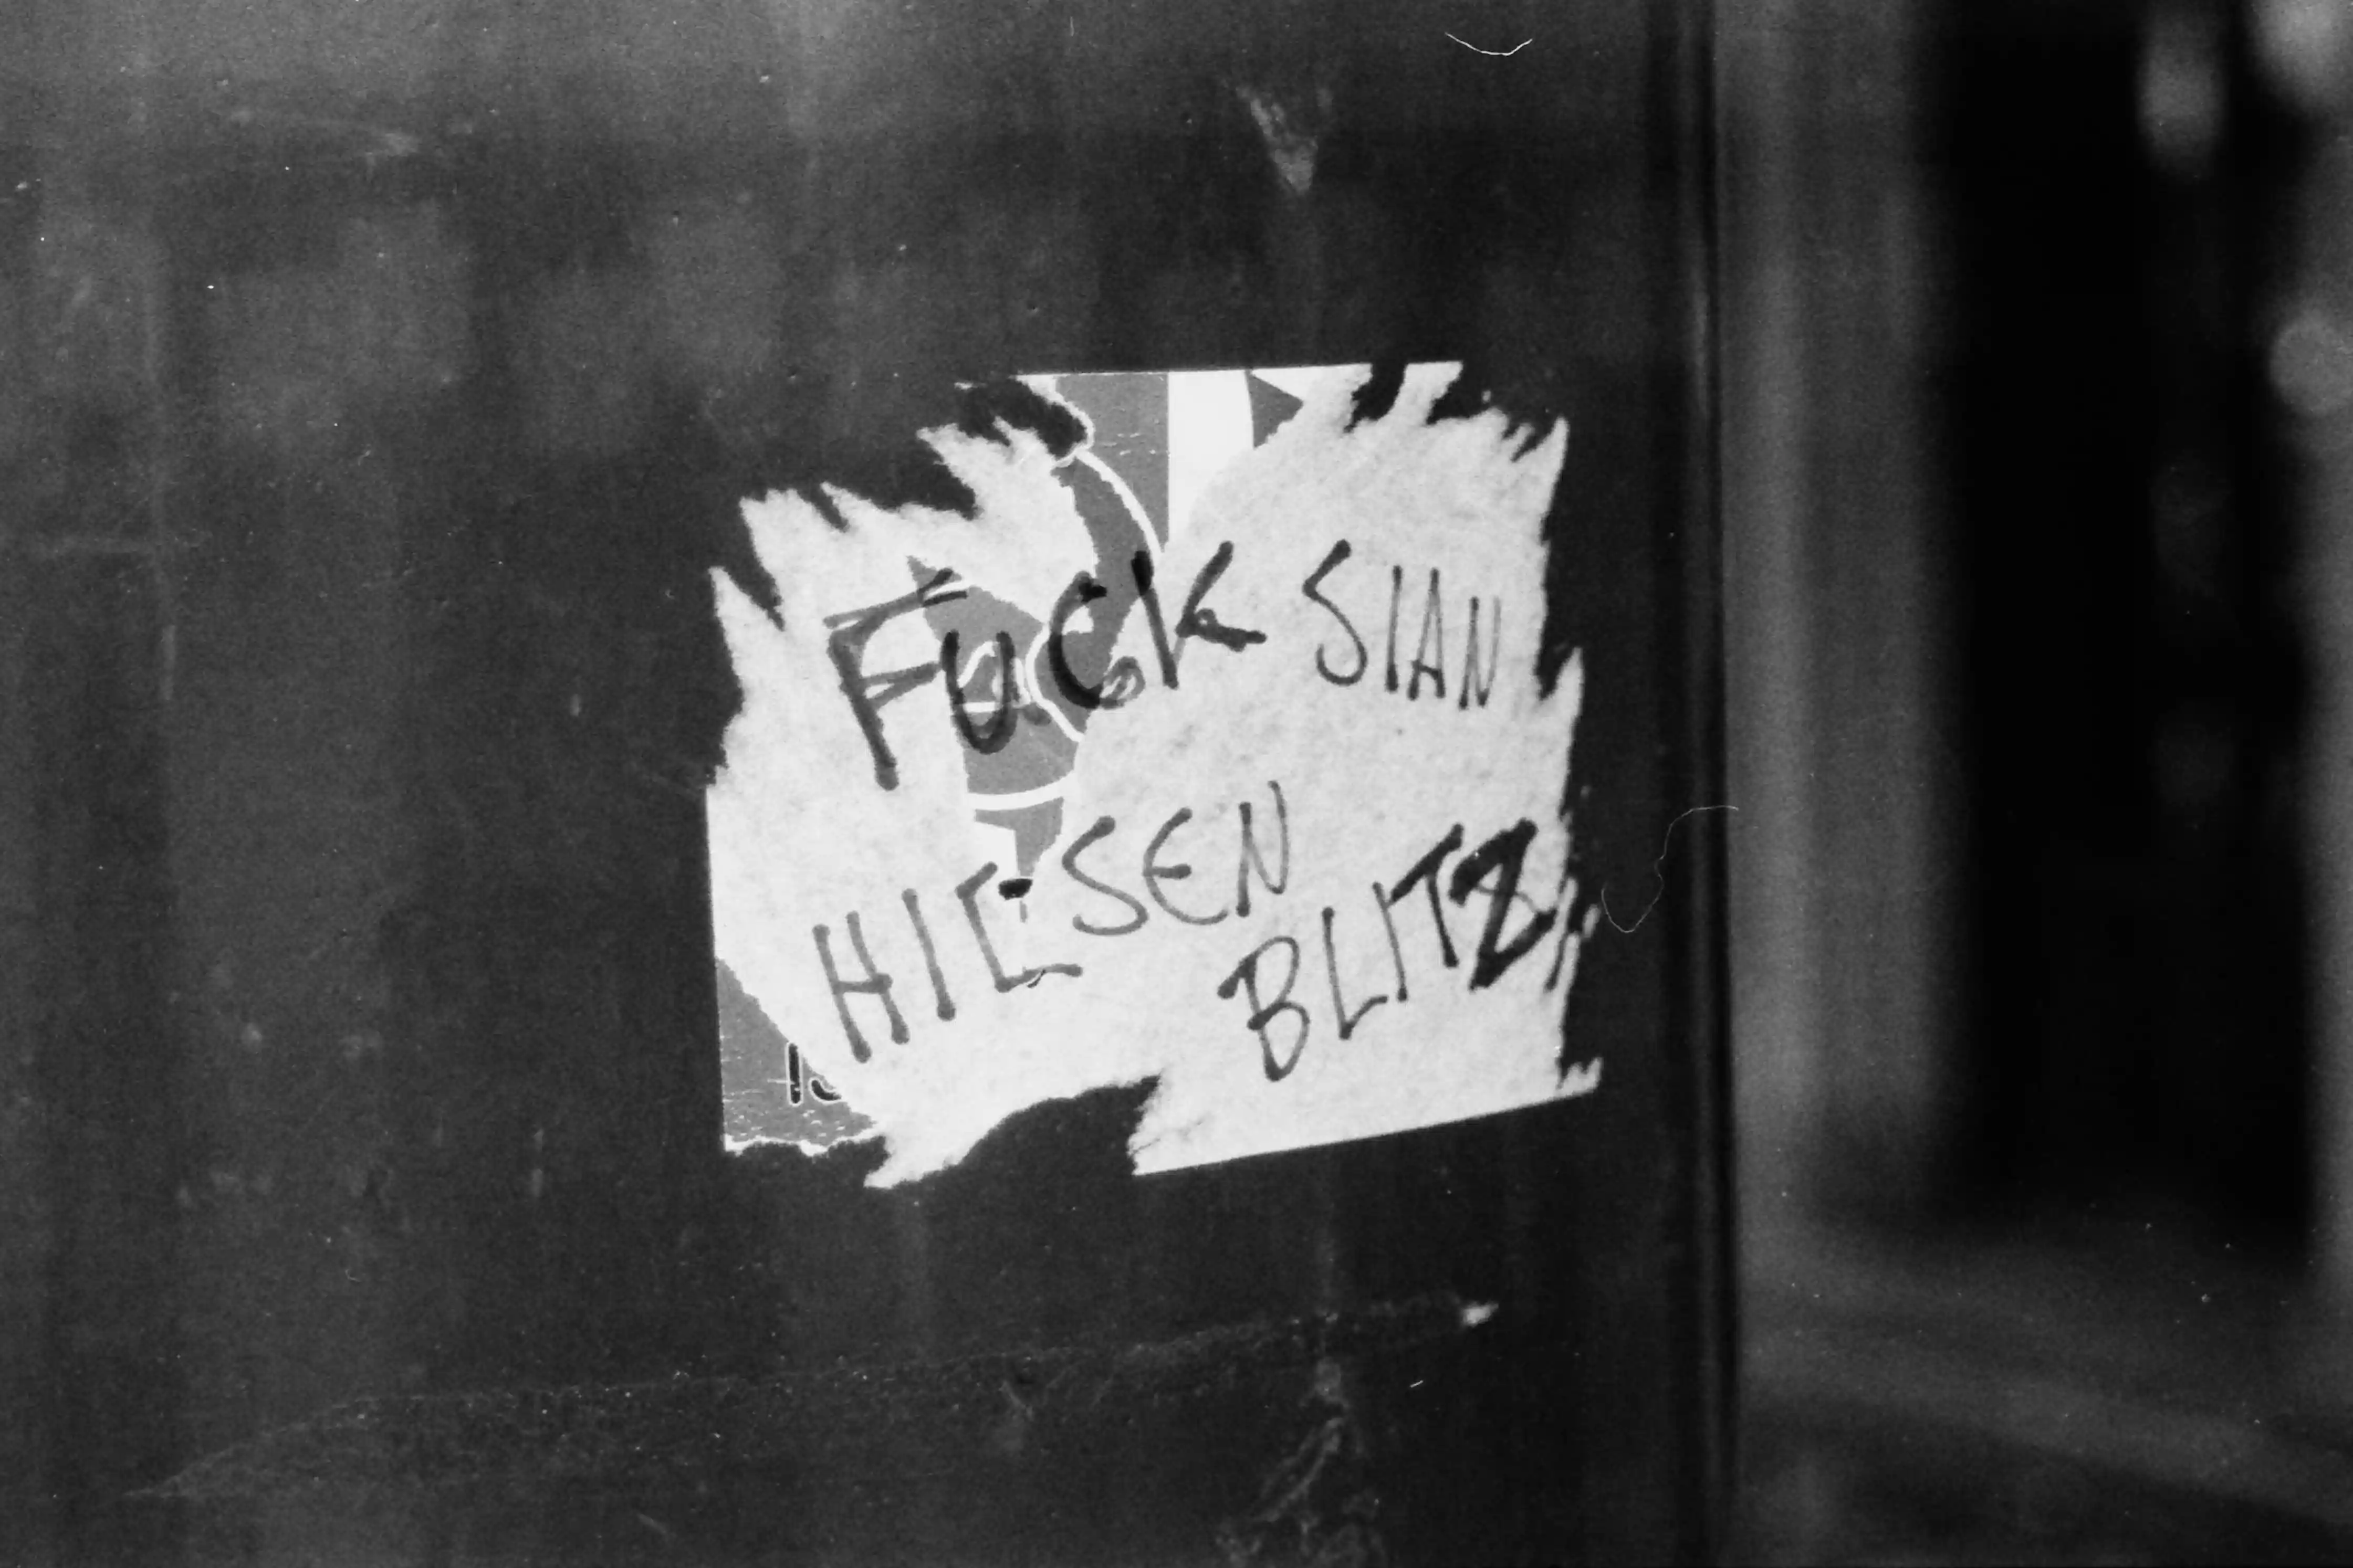 Black and white closeup picture of a partially torn sticker with the text “Fuck SIAN Hilsen Blitz”